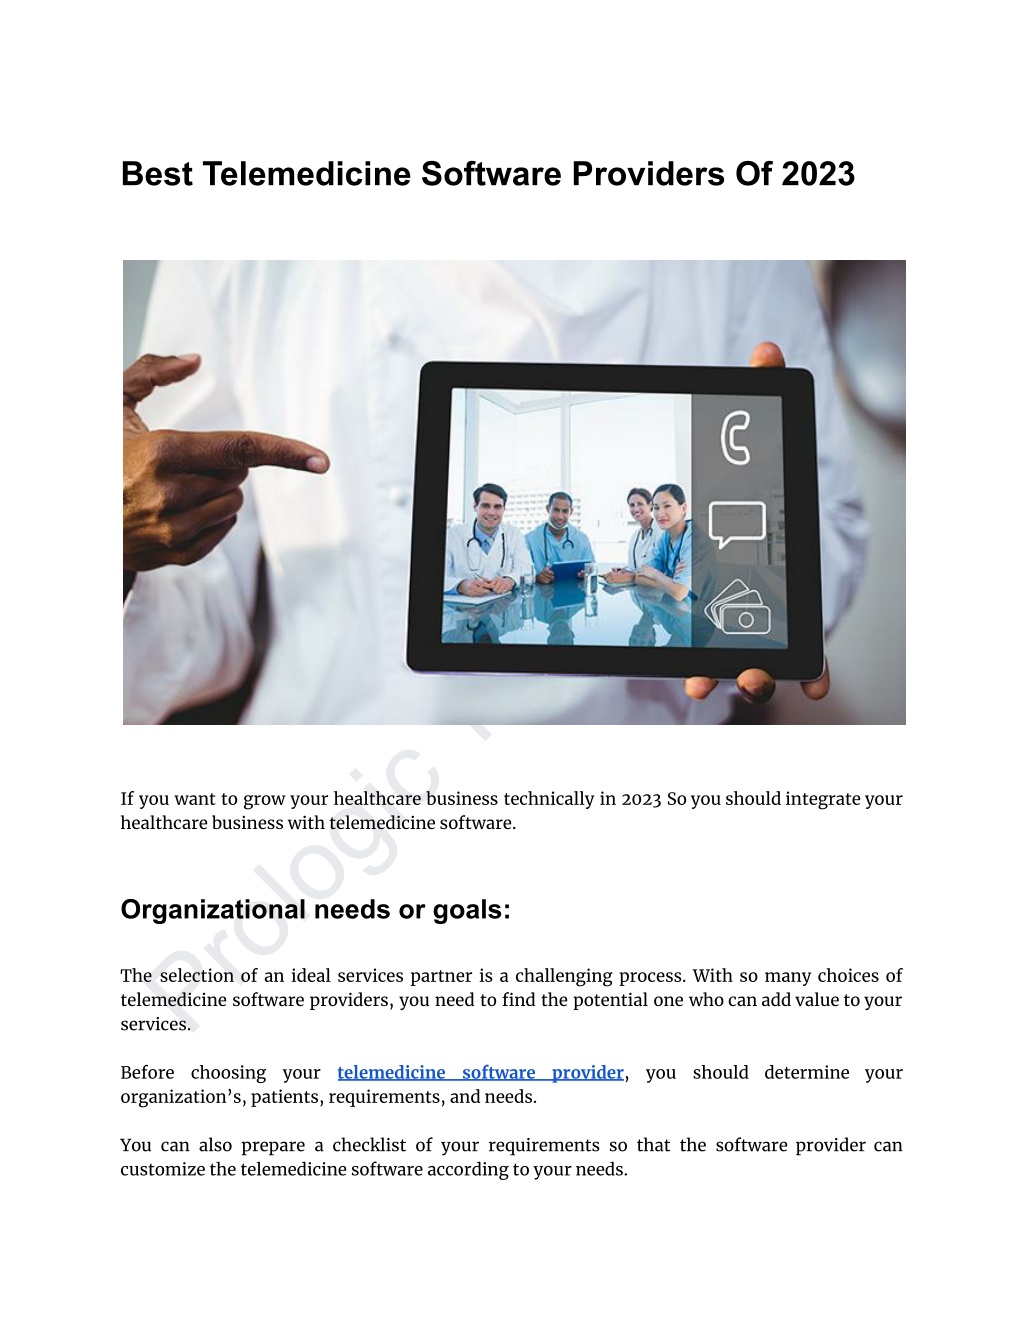 PPT Best Telemedicine Software Providers Of 2023 PowerPoint